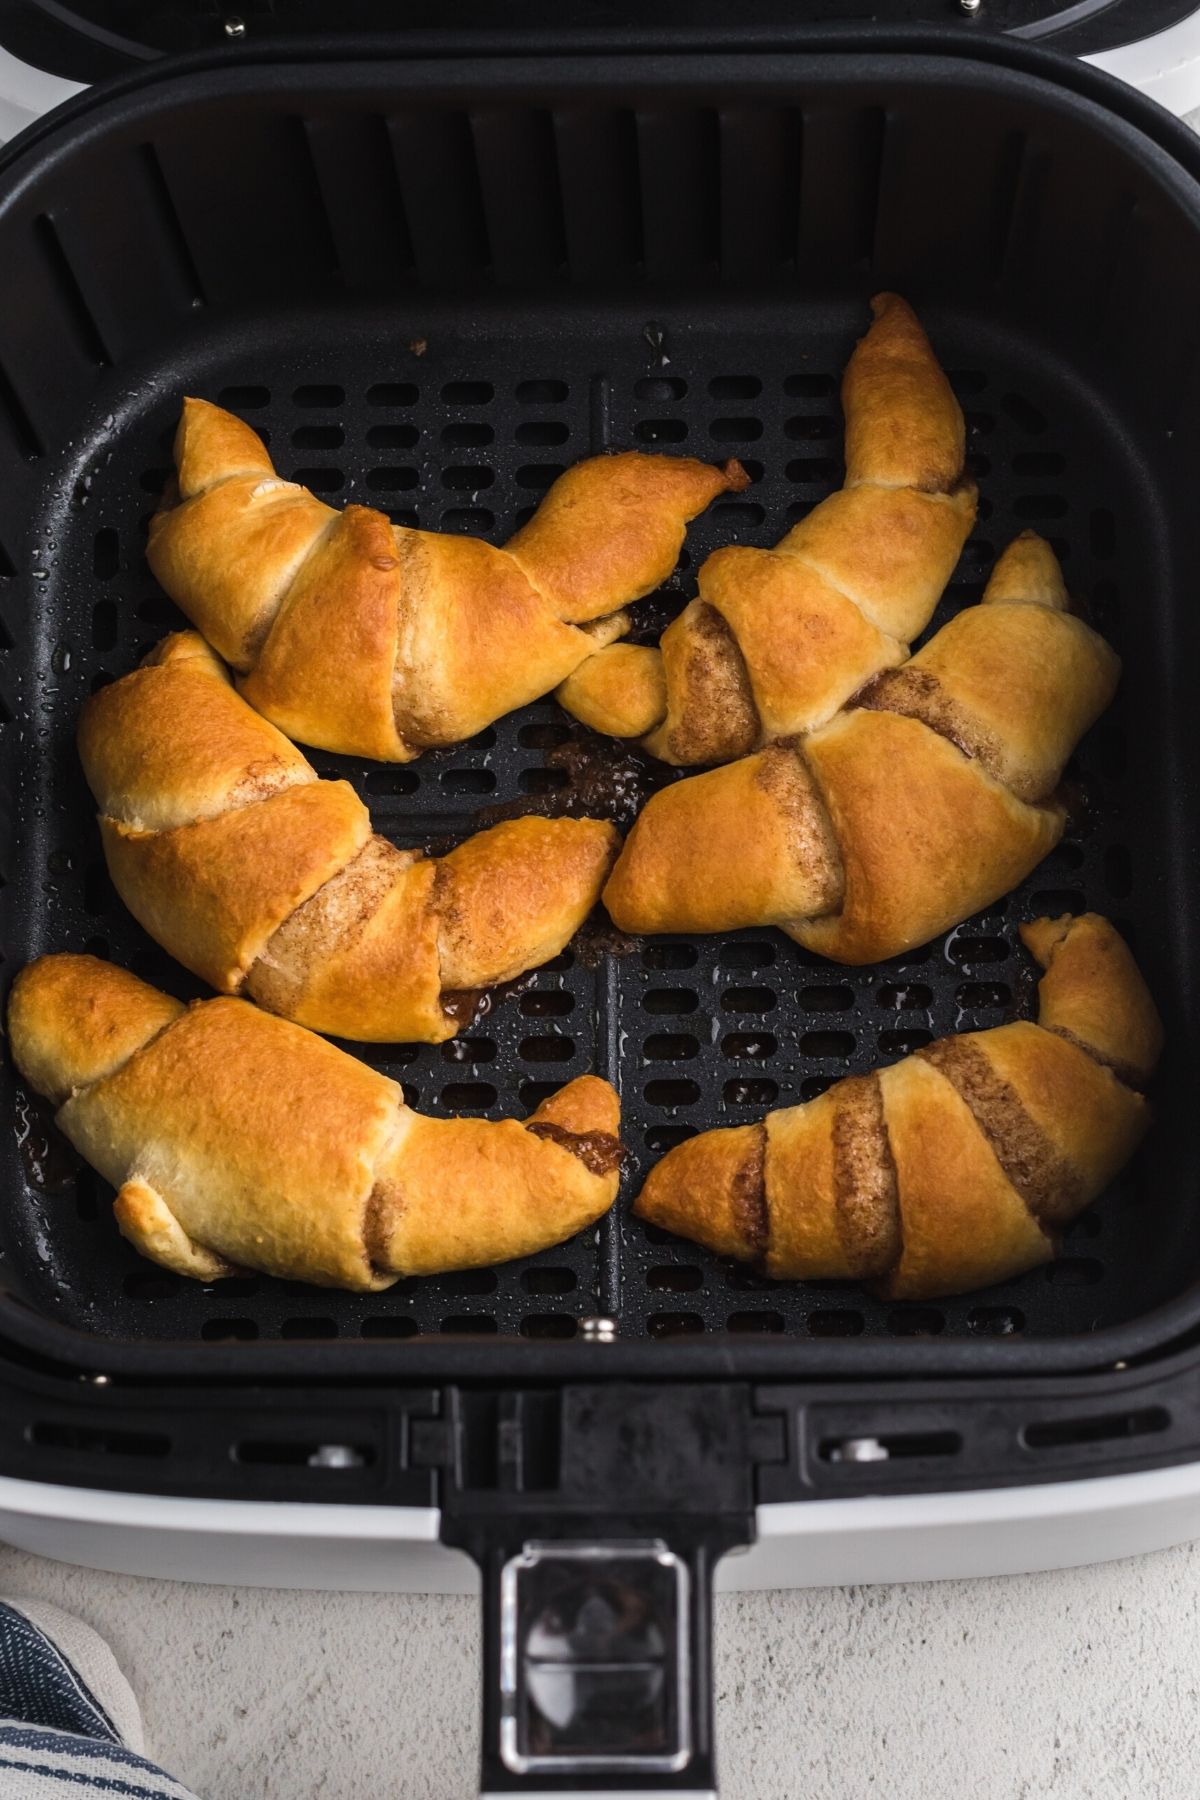 Golden cooked crescent rolls with cinnamon mixture mixed in each roll, in the air fryer basket